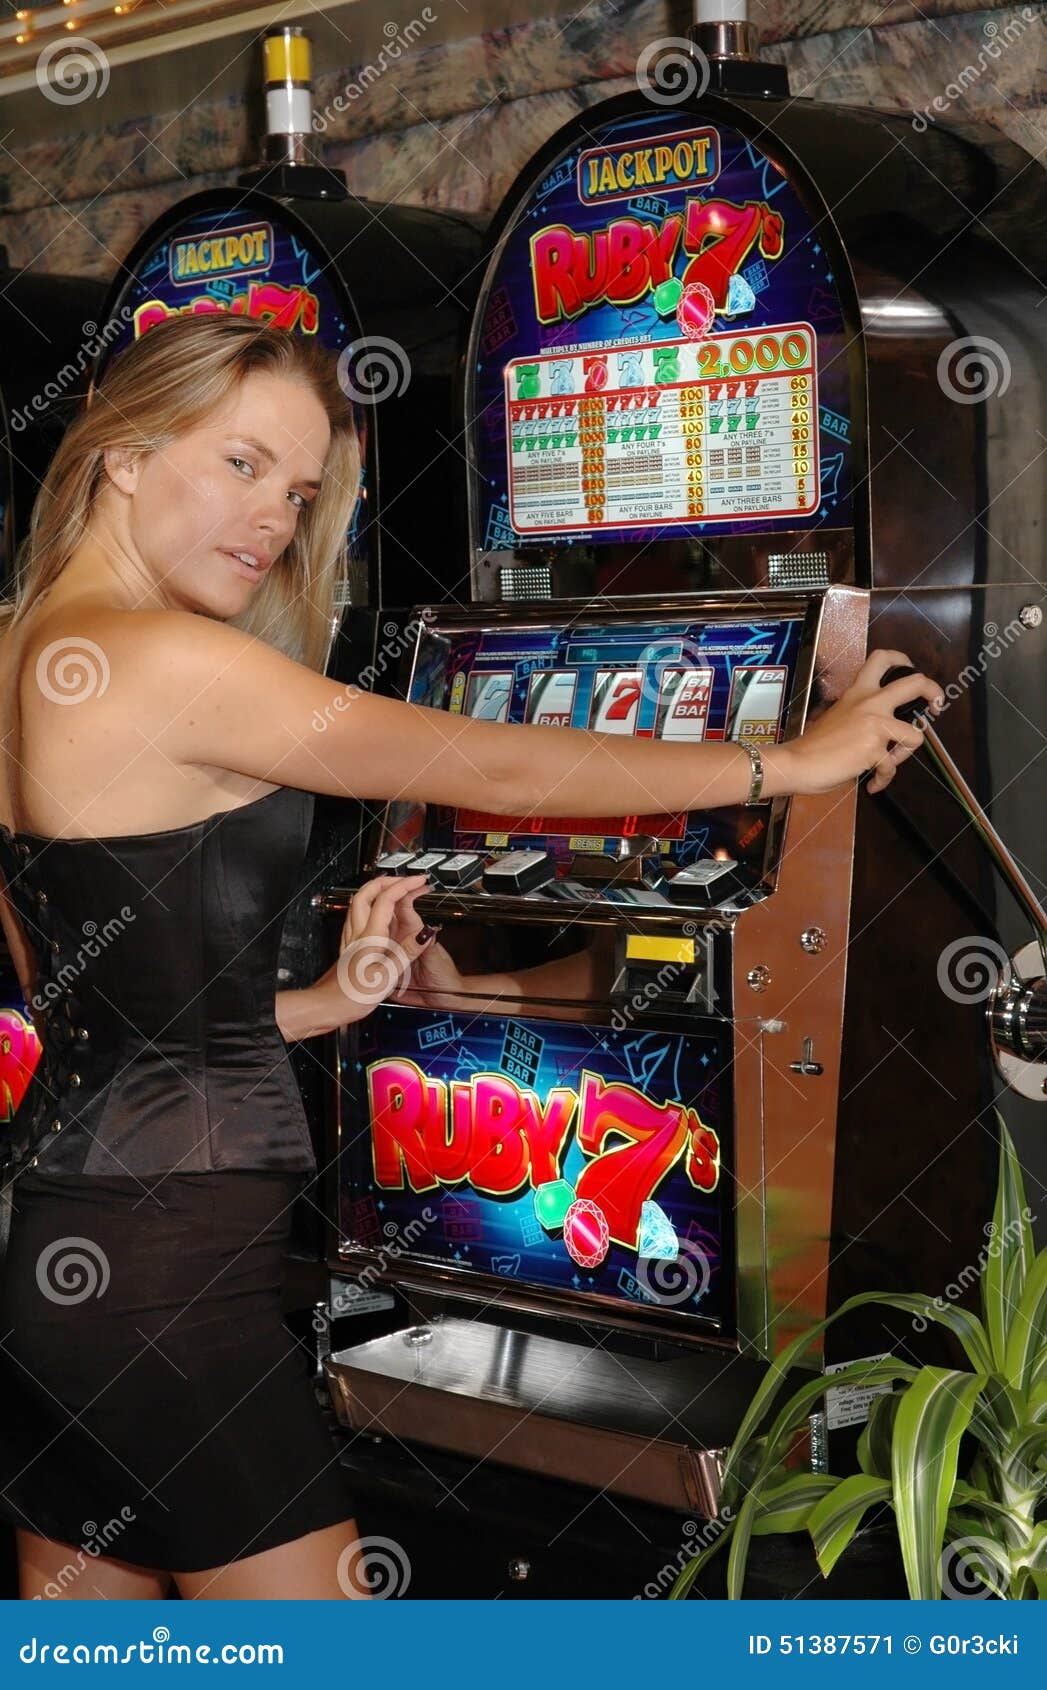 Young Woman In Casino On A Slot Machine Stock Image 